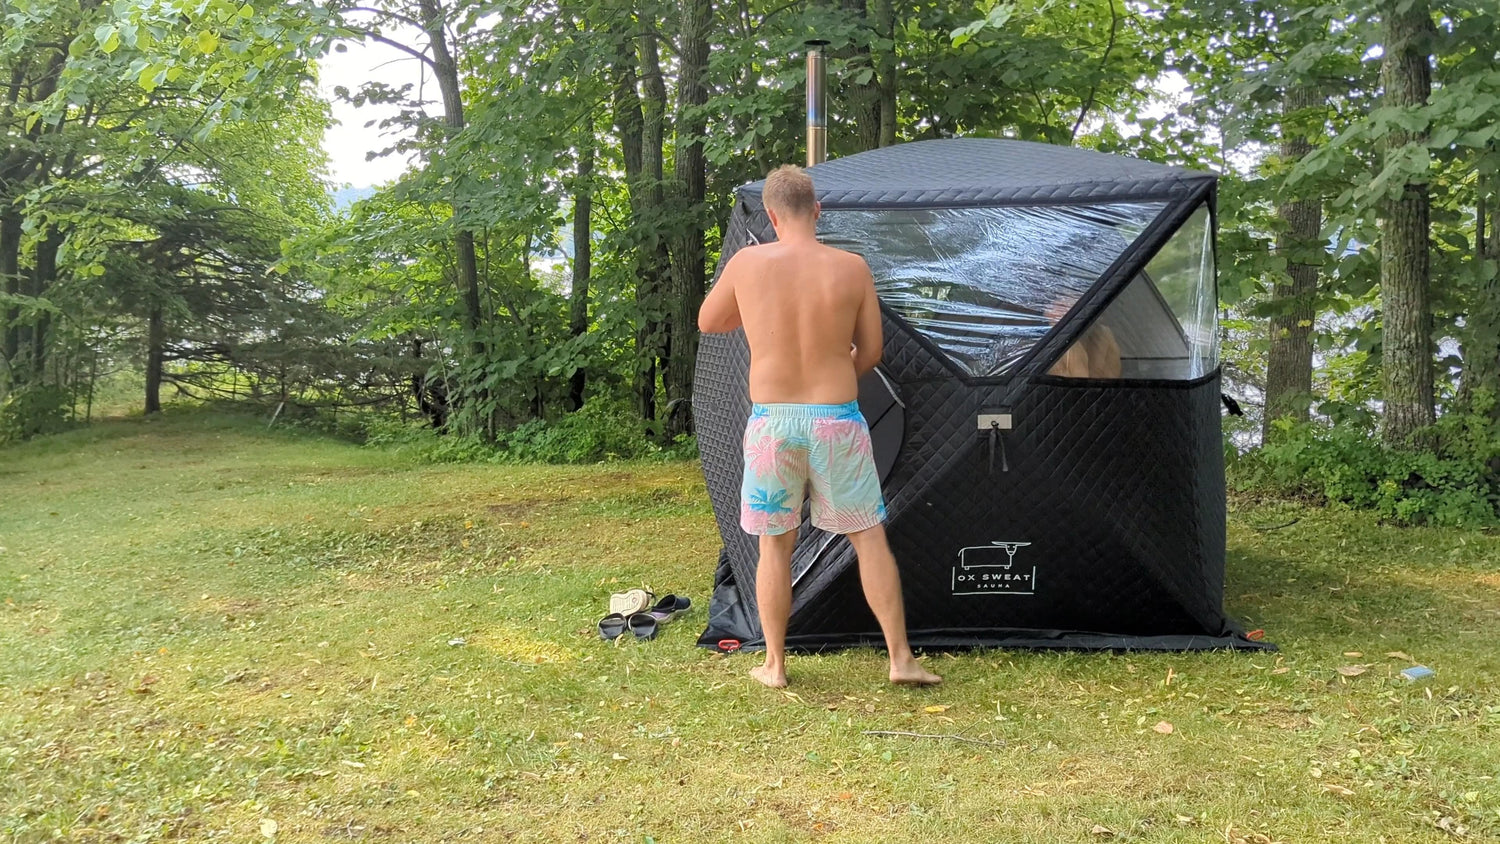 A stunning image of a portable sauna set amidst a breathtaking outdoor backdrop. A happy camper is seen relaxing inside the sauna, surrounded by nature's beauty.